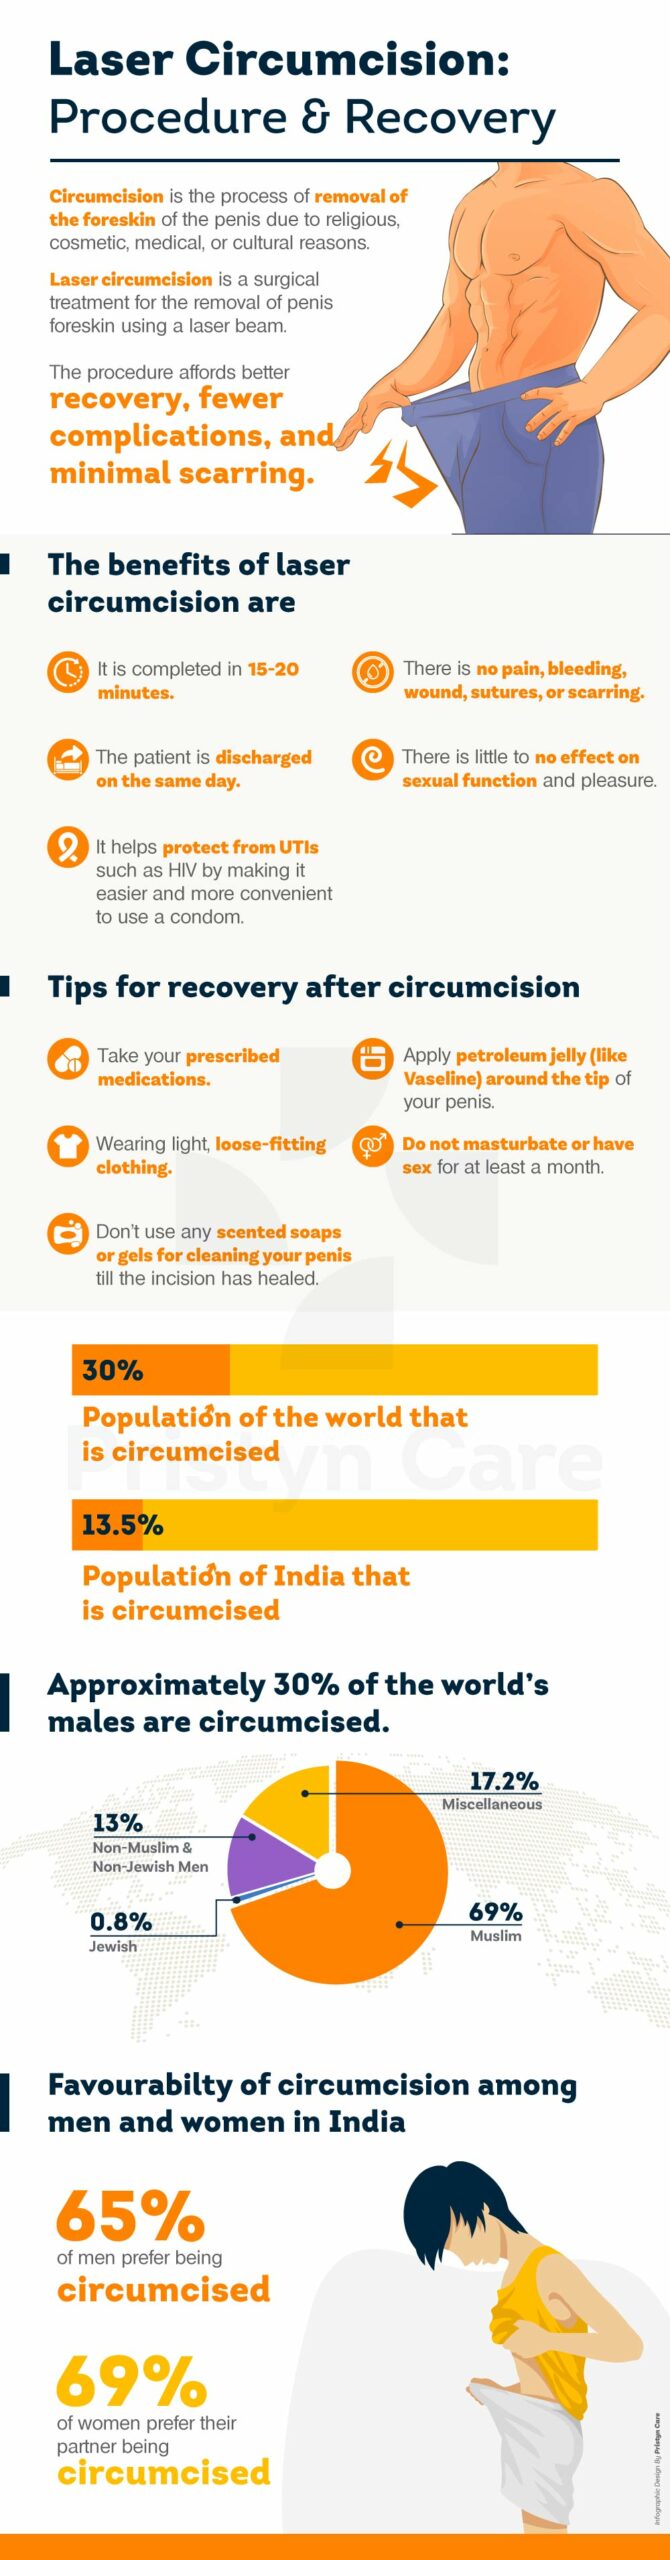 Infographic circumcision tips, recovery, statistics